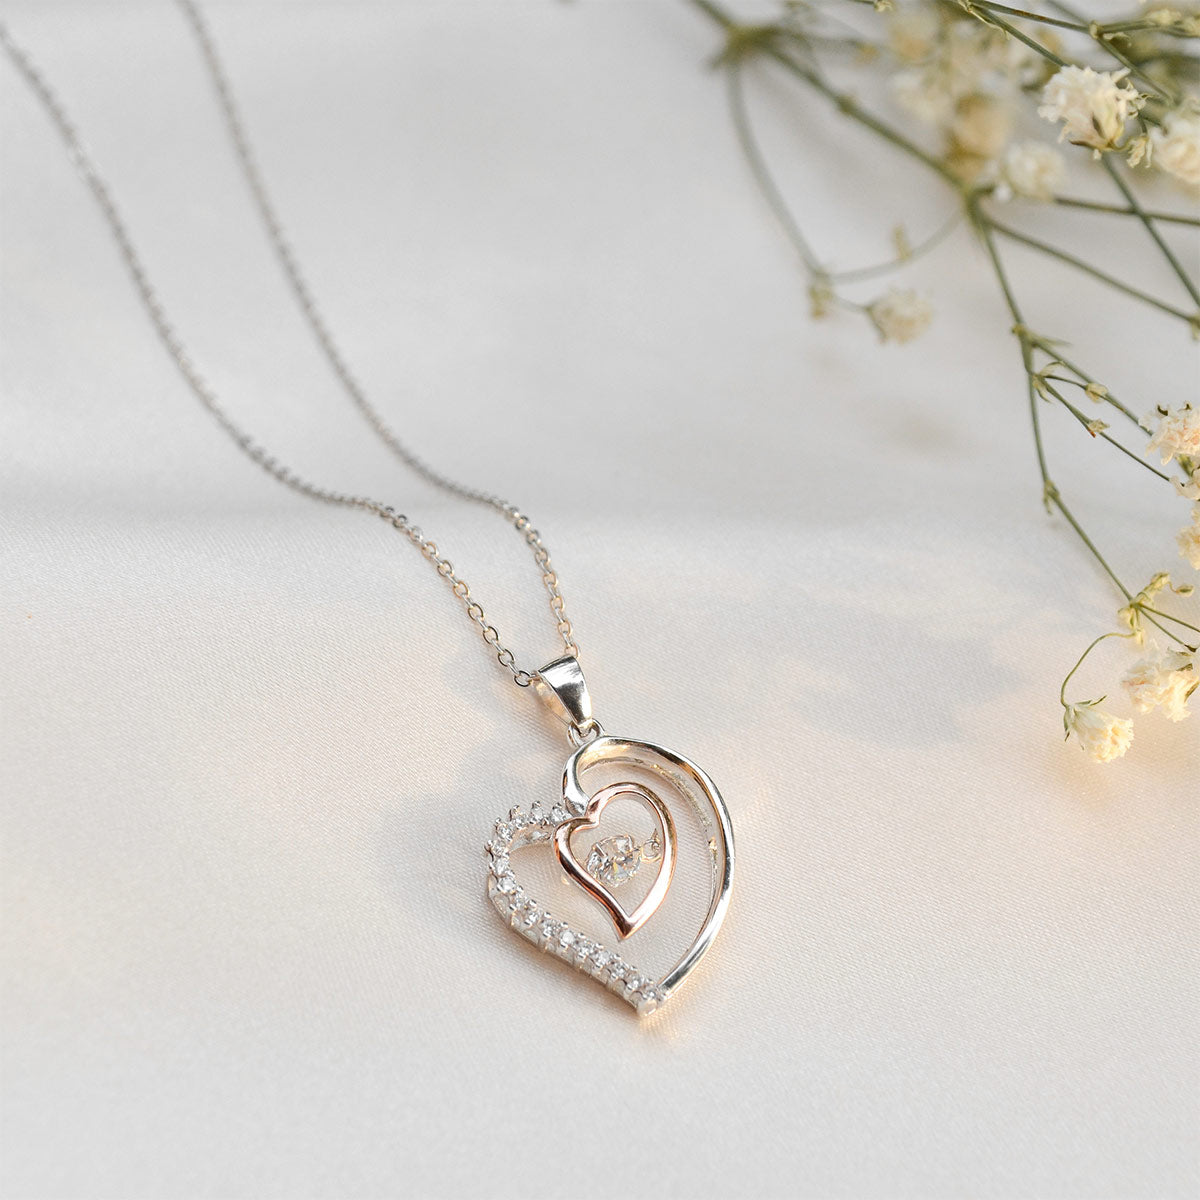 Happy Birthday To An Amazing Woman - Luxe Heart Necklace Gift Set